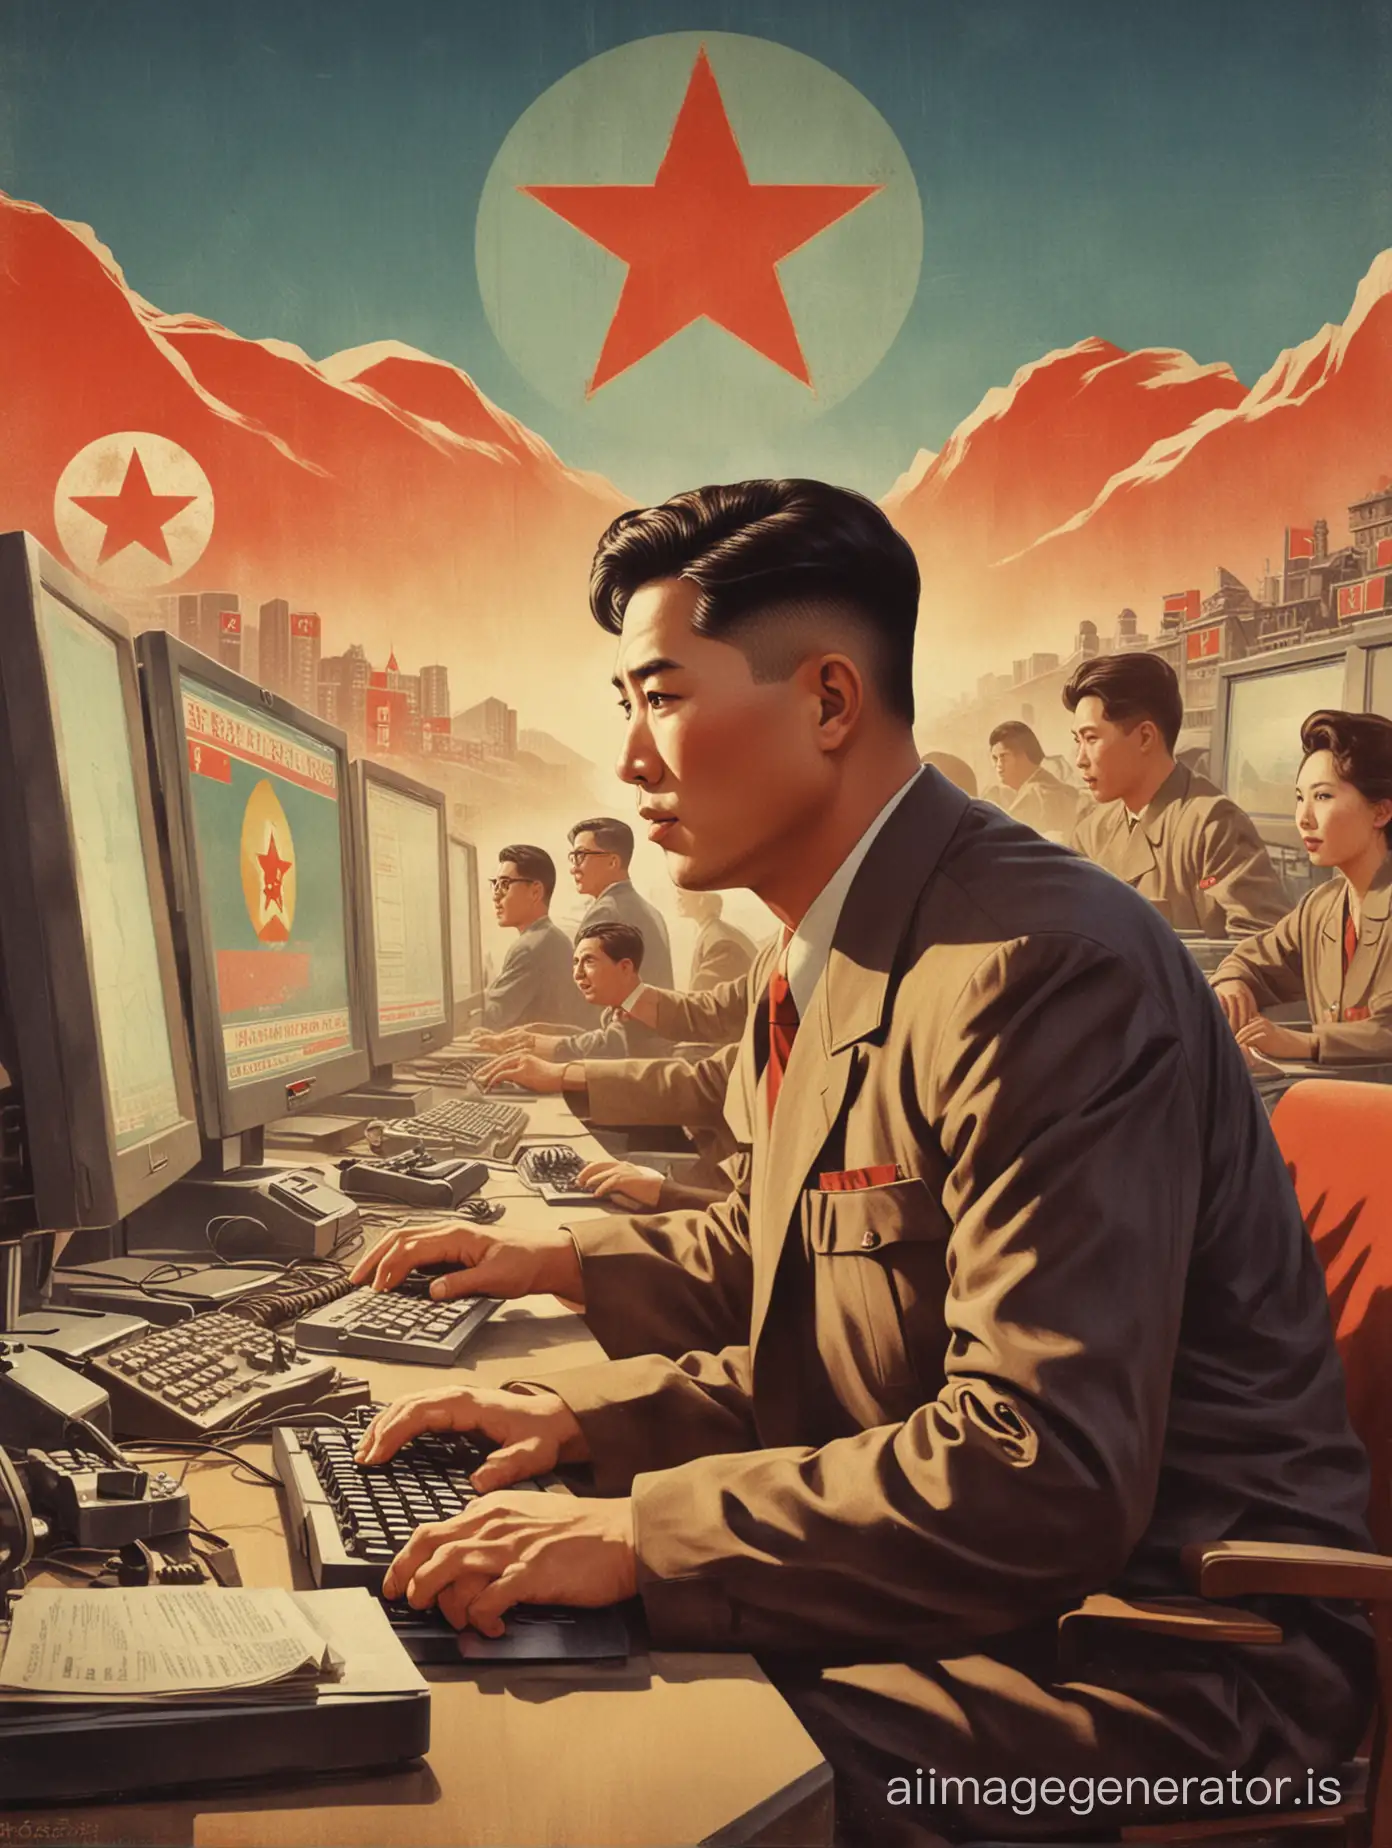 crypto traders trading on computers in vintage north korean communist poster style